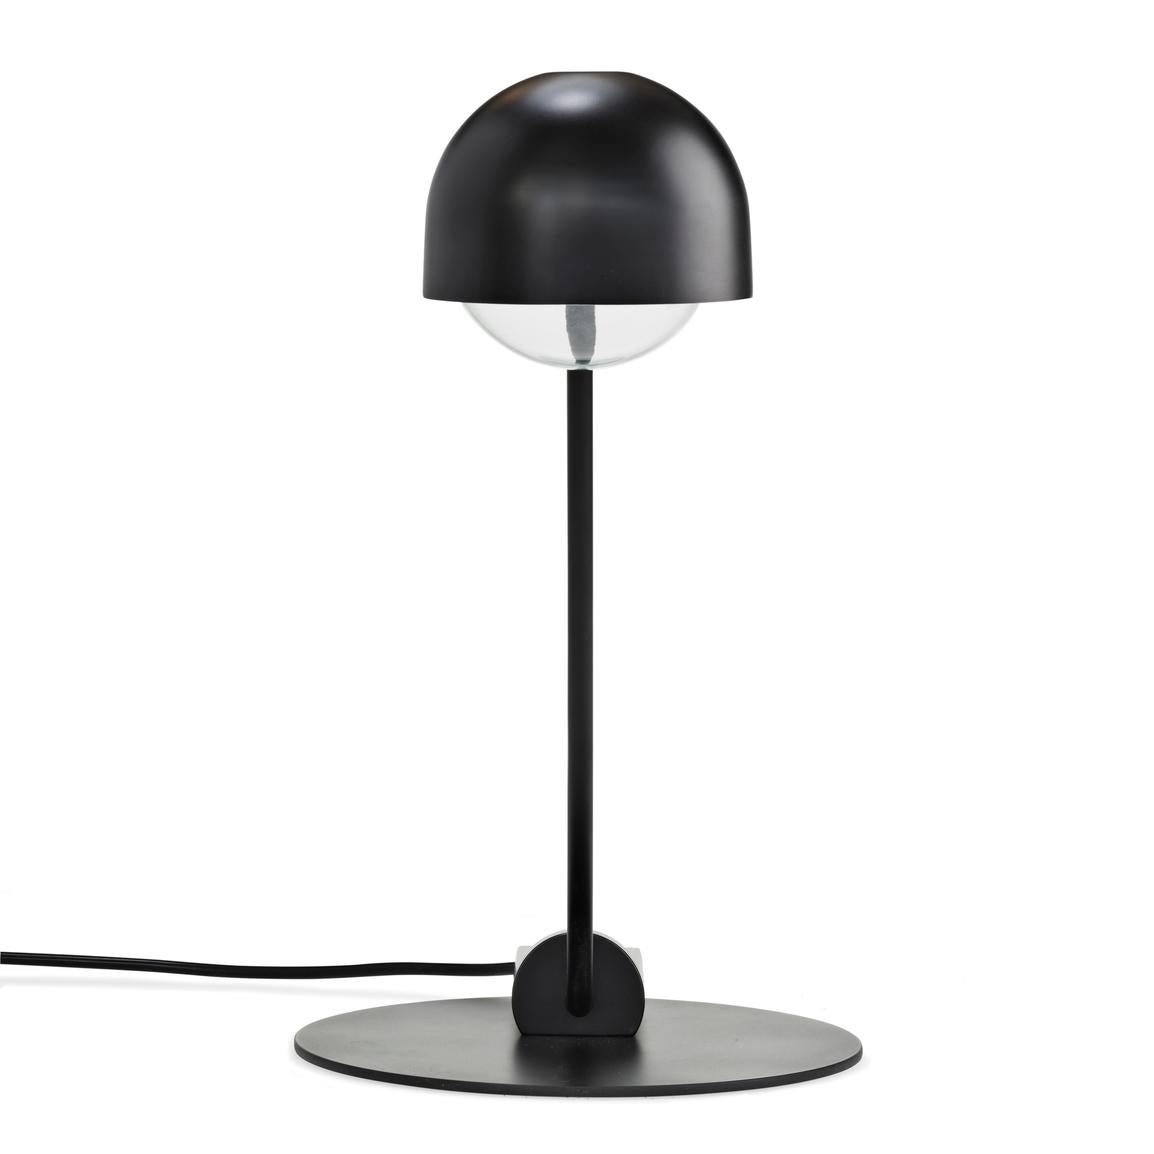 Table lamp designed by Joe Colombo in 1965. 

The Domo lamp was originally designed by Italian designer Joe Colombo in 1965. Back then he designed three lamps based on the same core shape. Known for his democratic and functional design, his